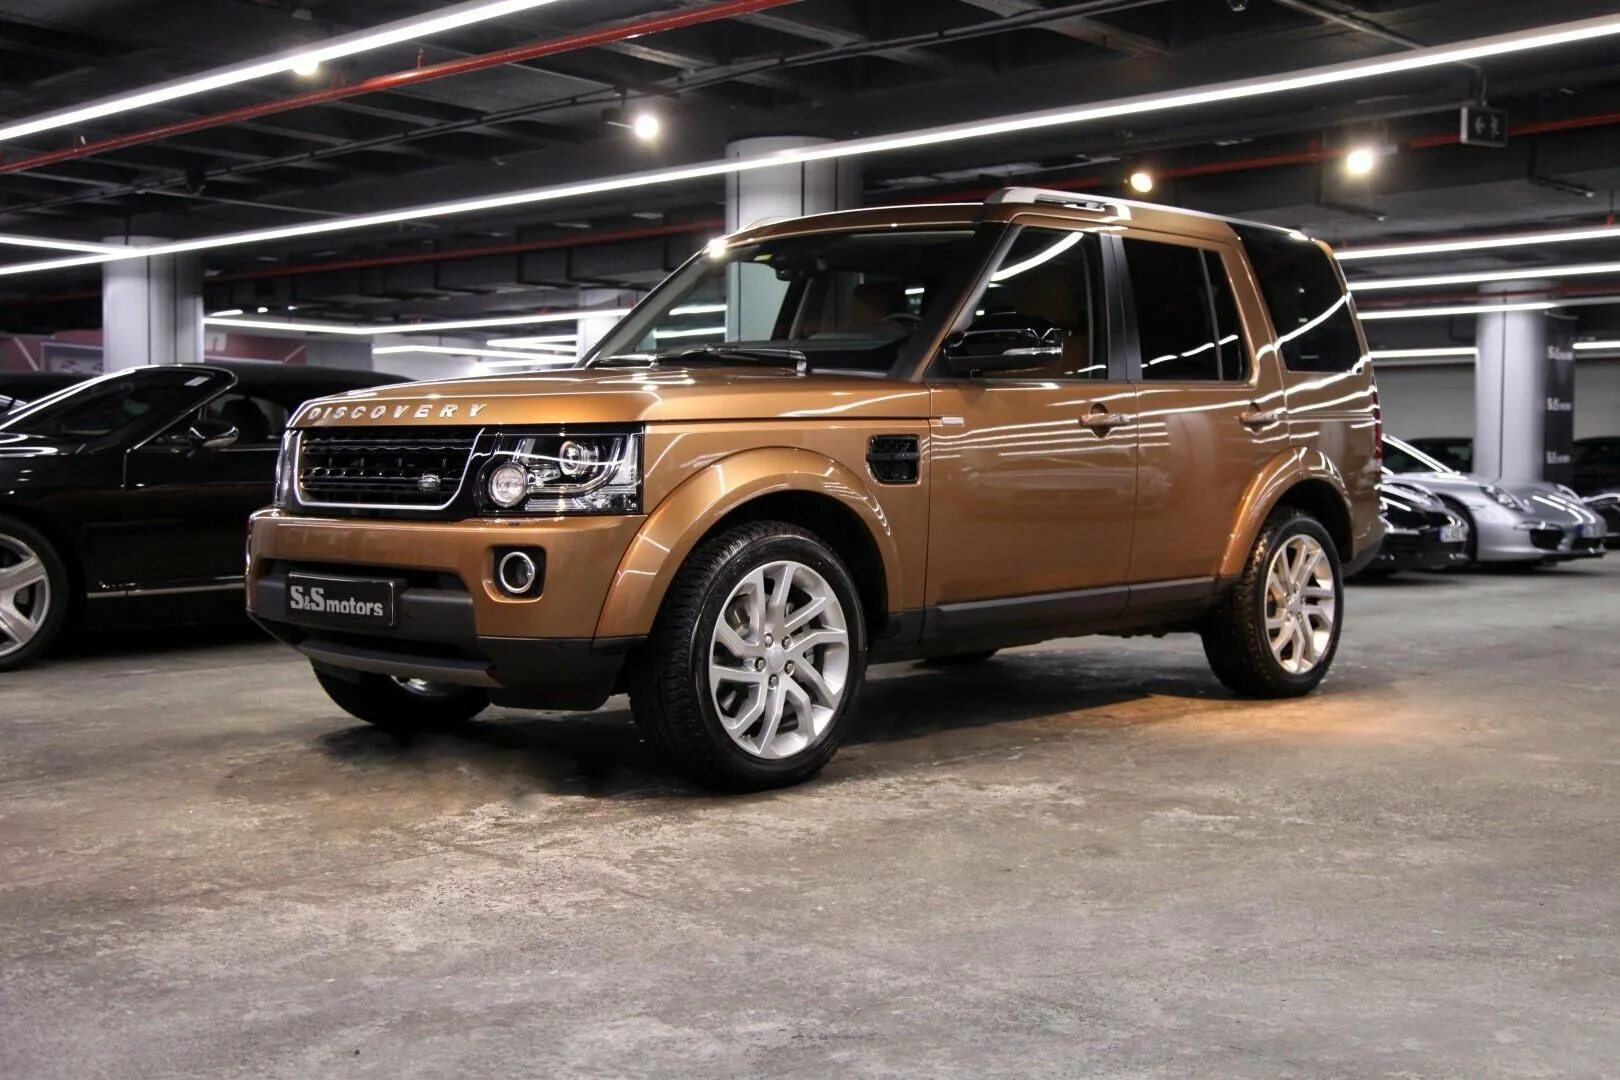 Land Rover Discovery 4. Land Rover Discovery 4 landmark. Land Rover Discovery 3 2016. Ленд Ровер Дискавери 4 2016.